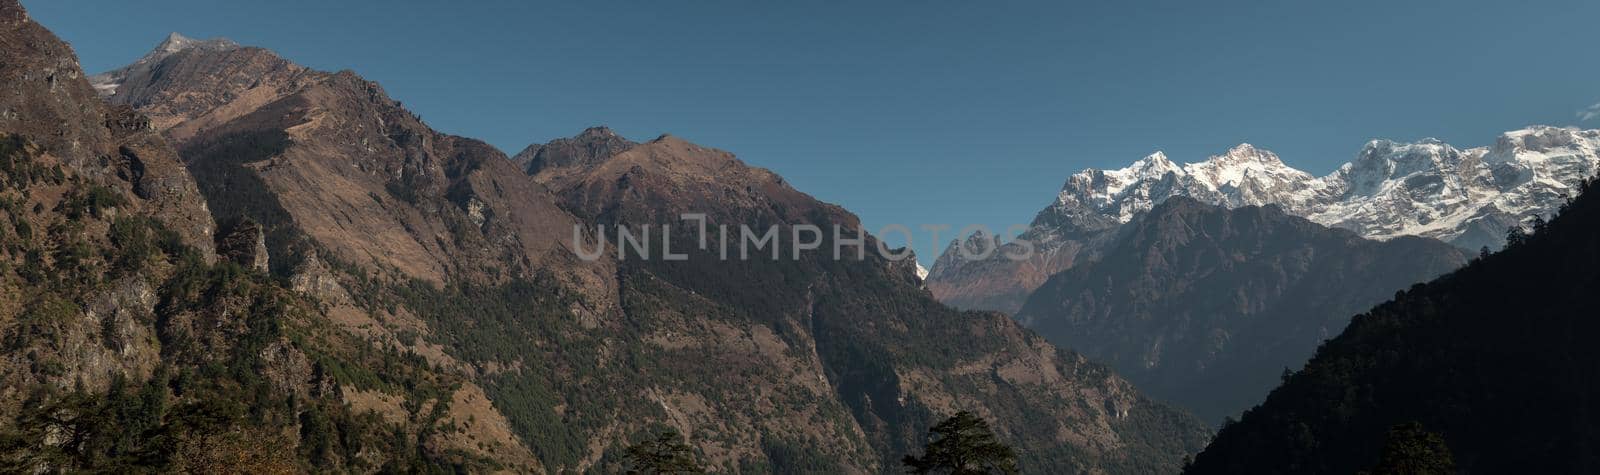 Panorama of nepalese mountain ranges along Annapurna circuit by arvidnorberg